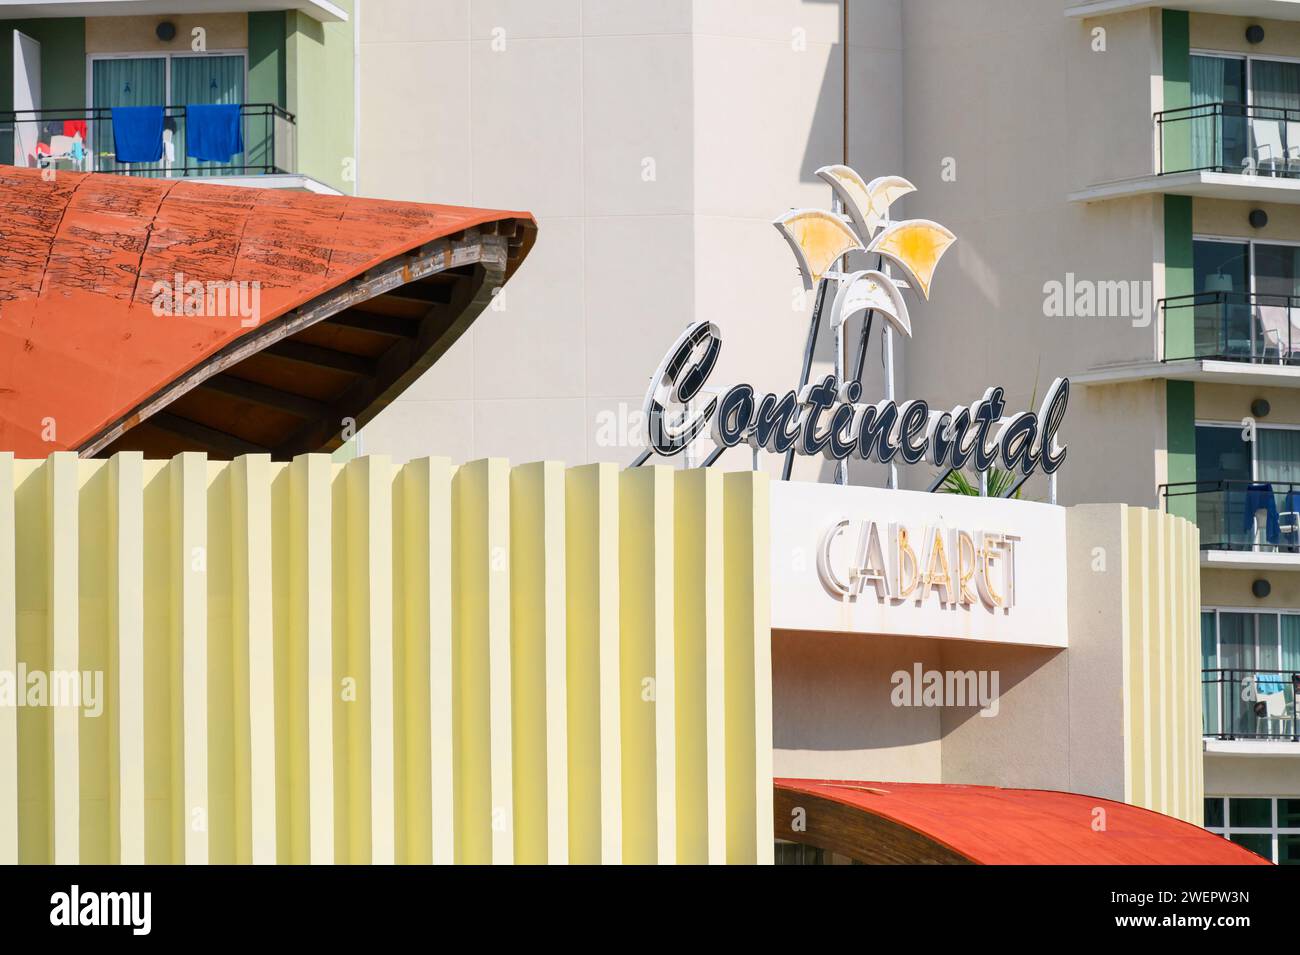 Business sign of Continental Cabaret in Varadero, Cuba Stock Photo